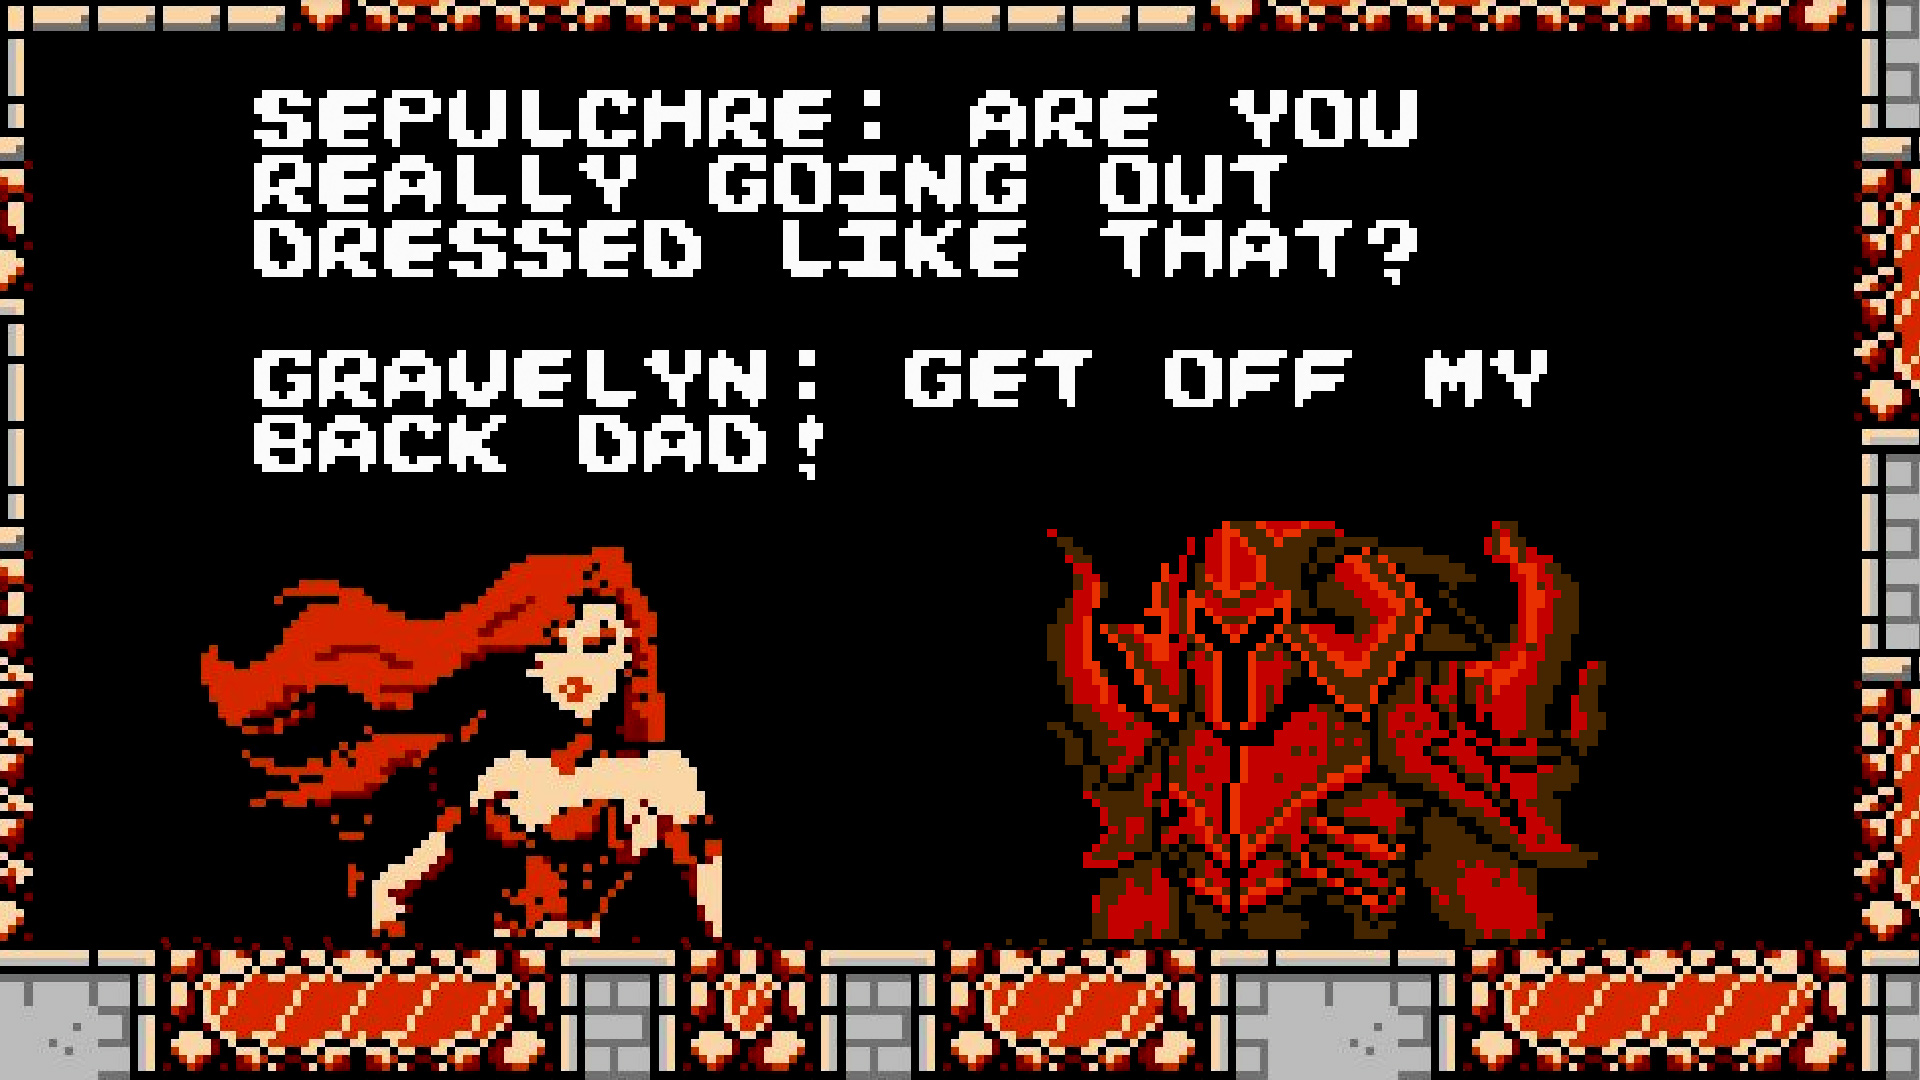 8-Bit Gravelyn and Sepulchure for the NES